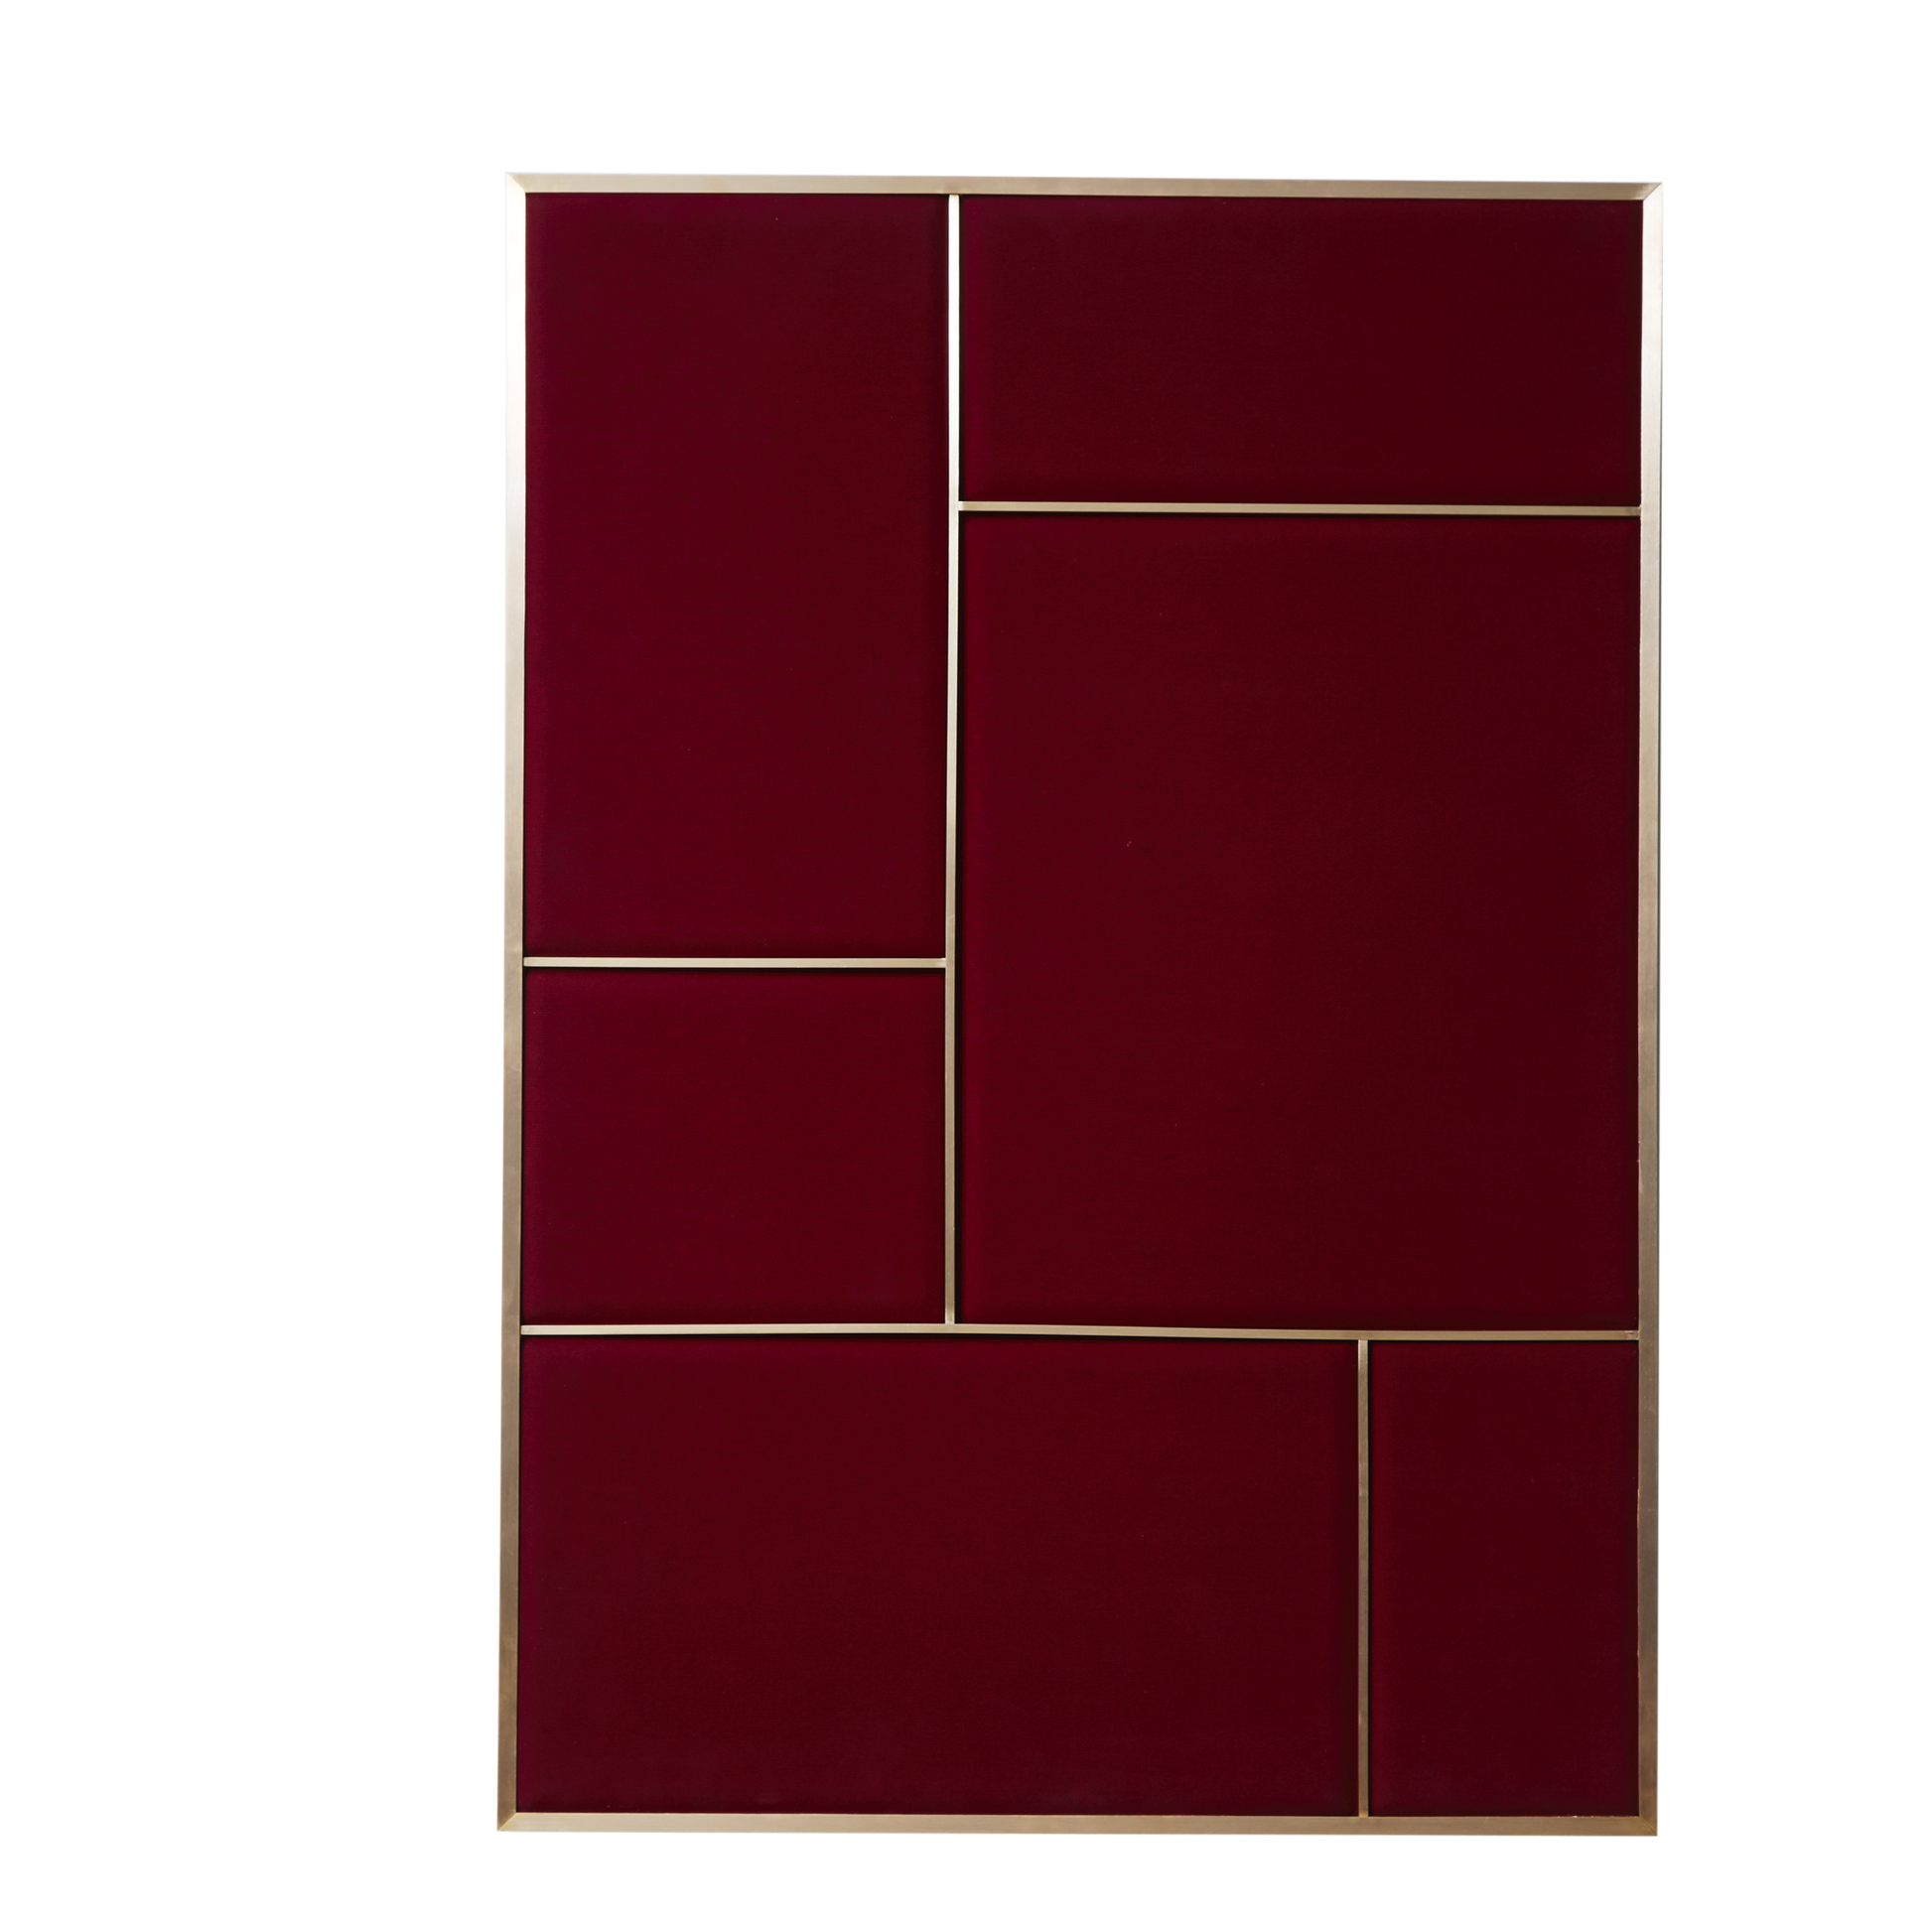 Nouveau Pin Notice Board Large by Please wait to be seated #Brass/ Rouge Noir